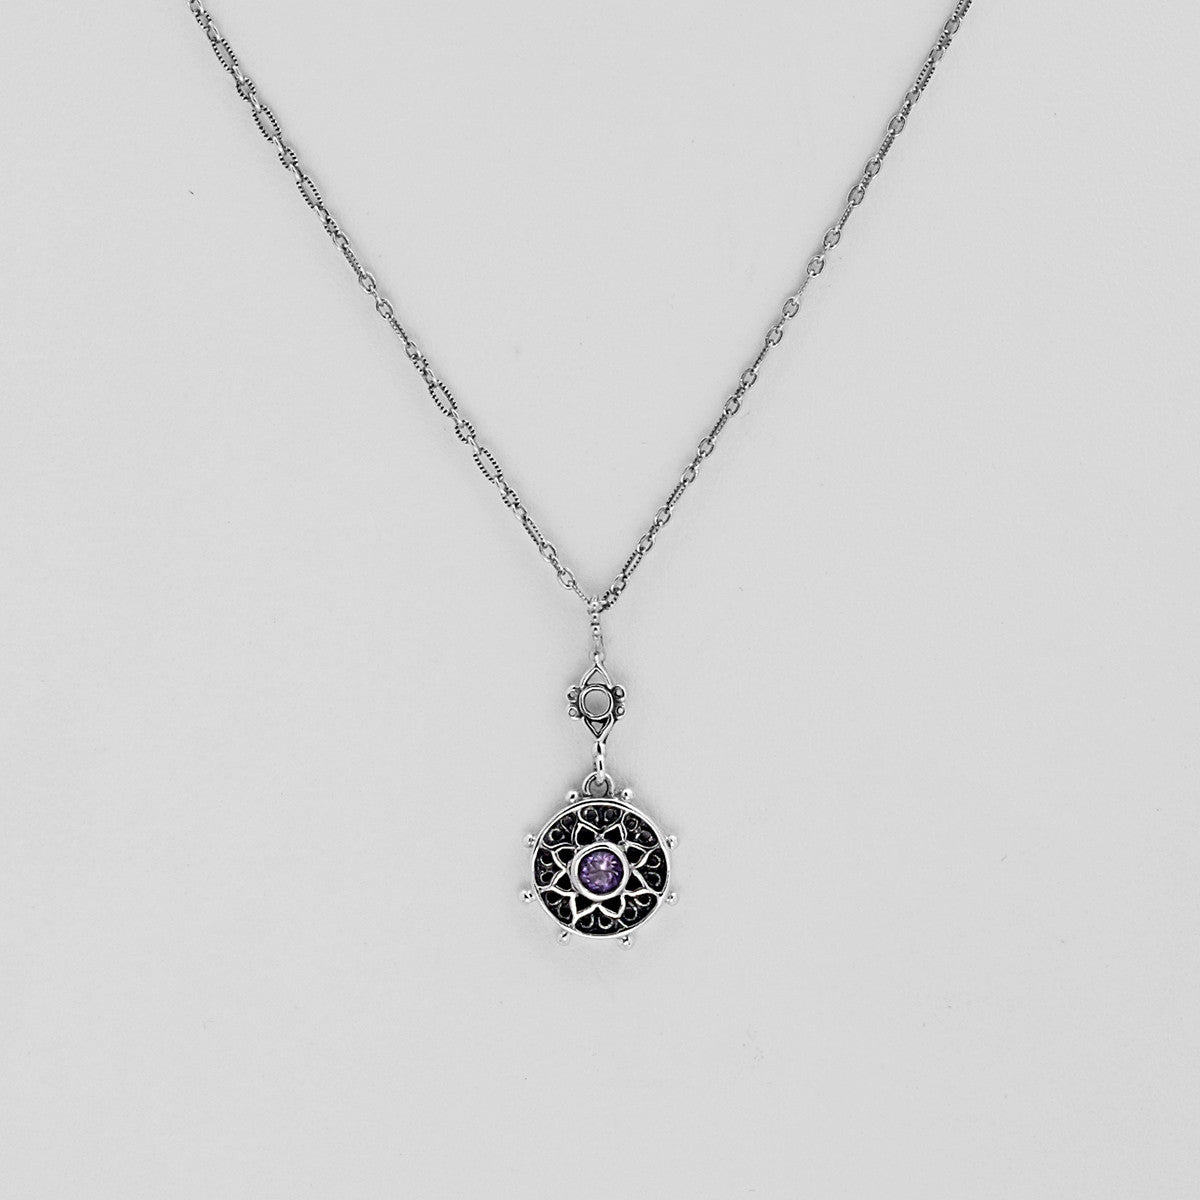 Dharmachakra Sterling Silver Amethyst Serenity Necklace - Cynthia Gale New York Jewelry